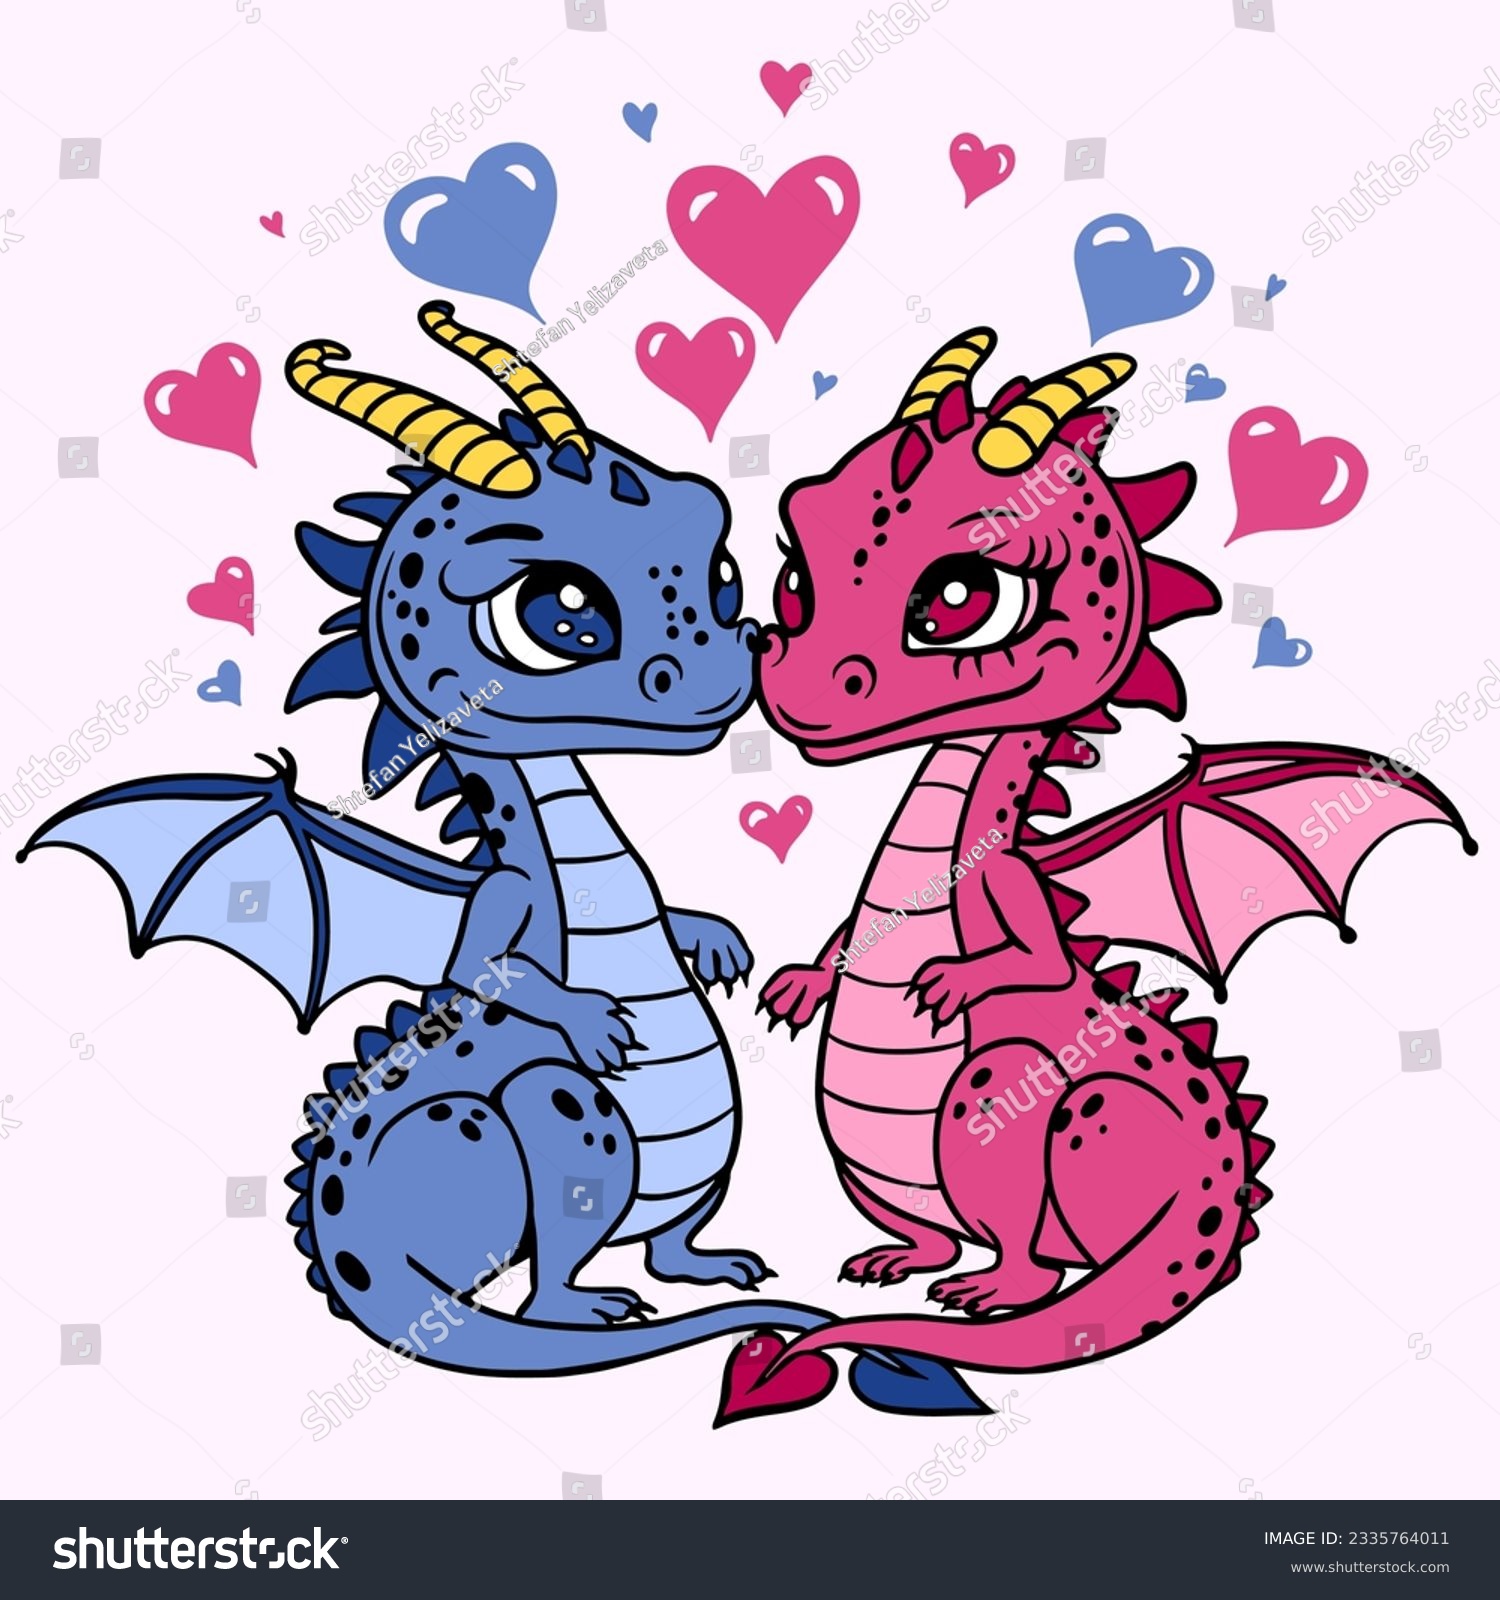 SVG of Two cute dragons, couple of mythical creatures in love.Cute cartoon couple of dragons. Vector illustration on a white background with hearts.For Print, Vinyl Cutting, Scrapbooking, Sticker, T shirt svg